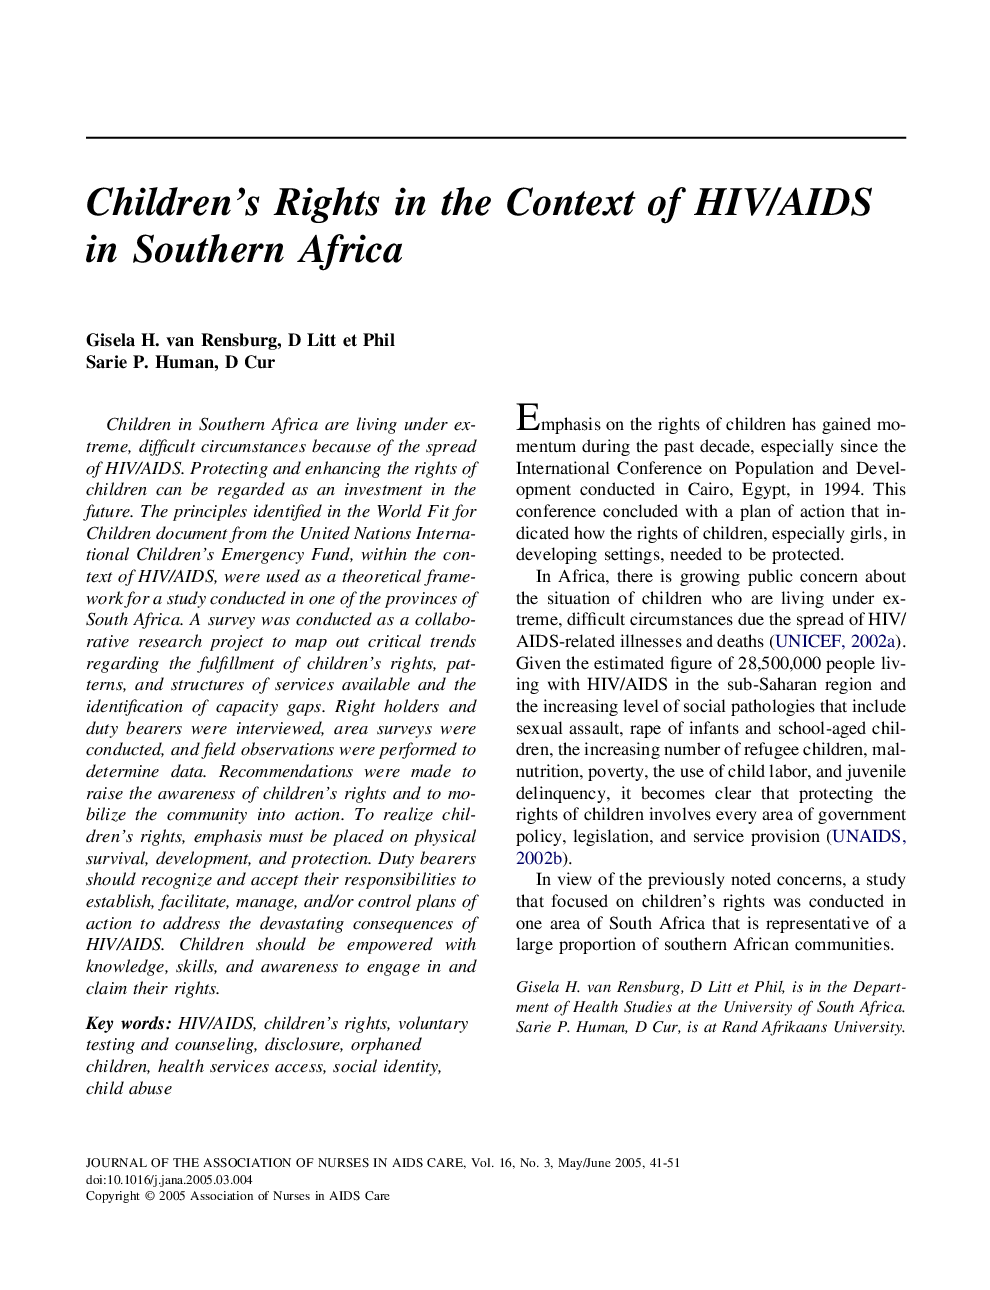 Children's Rights in the Context of HIV/AIDS in Southern Africa